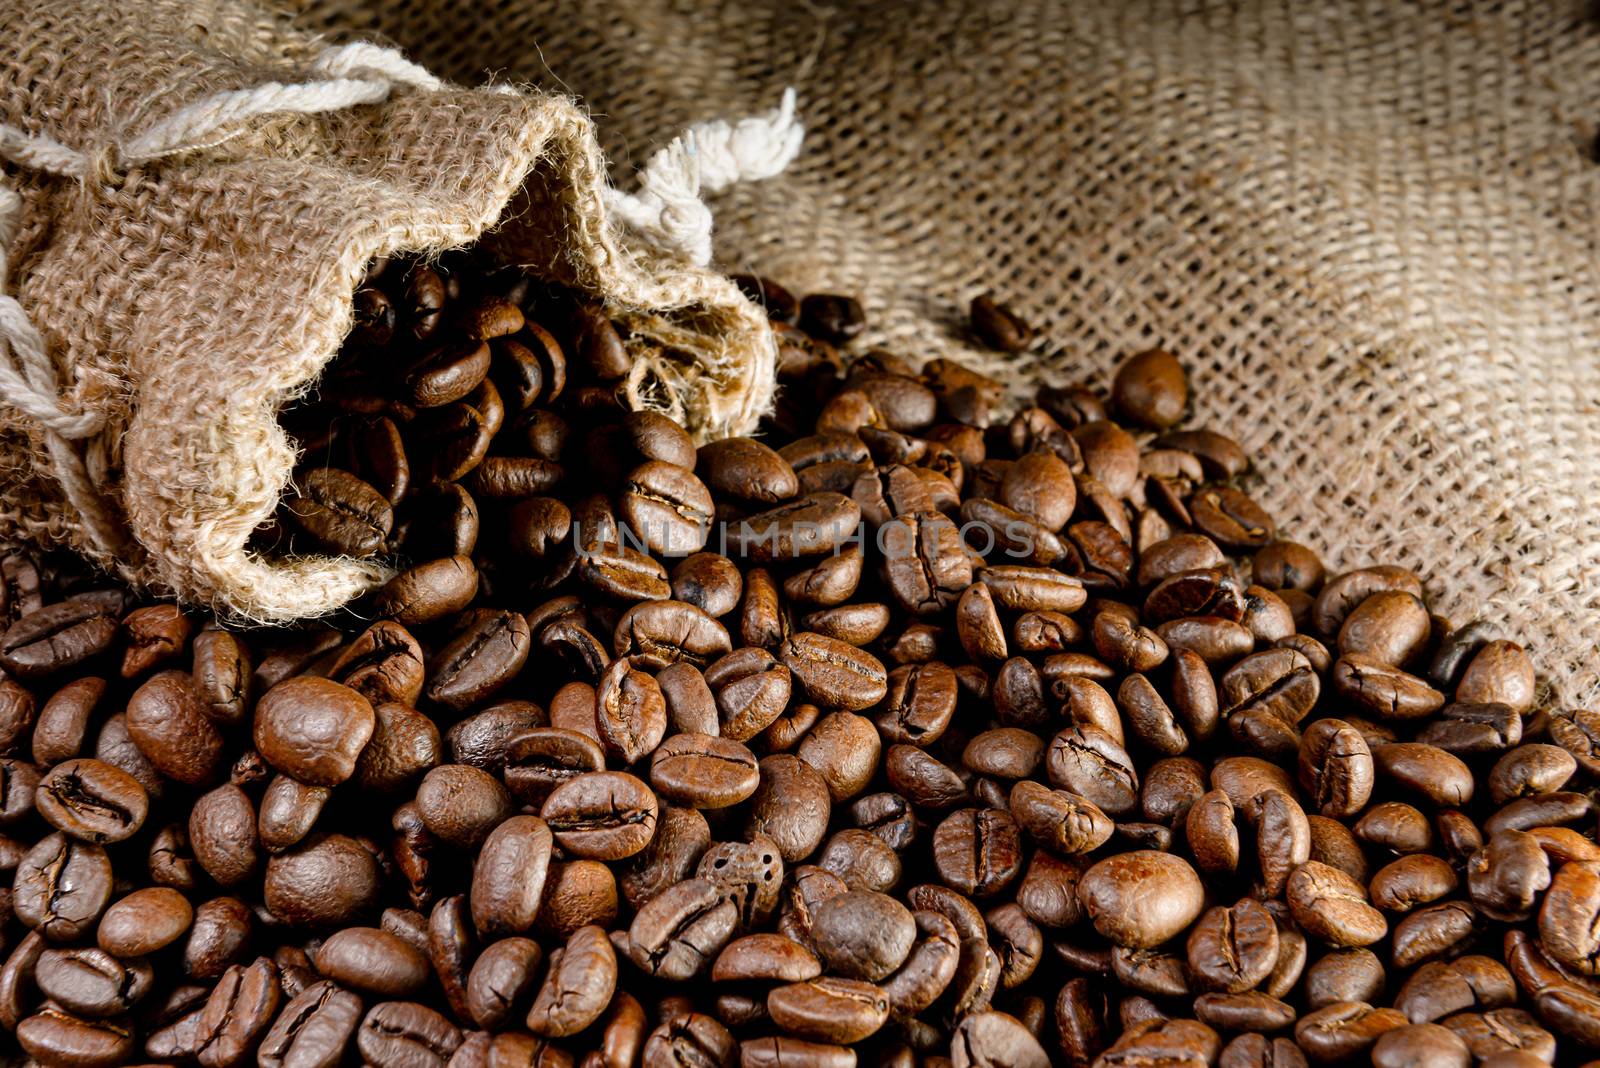 Coffee beans - coffee beans in a linen bag - selective focus - image